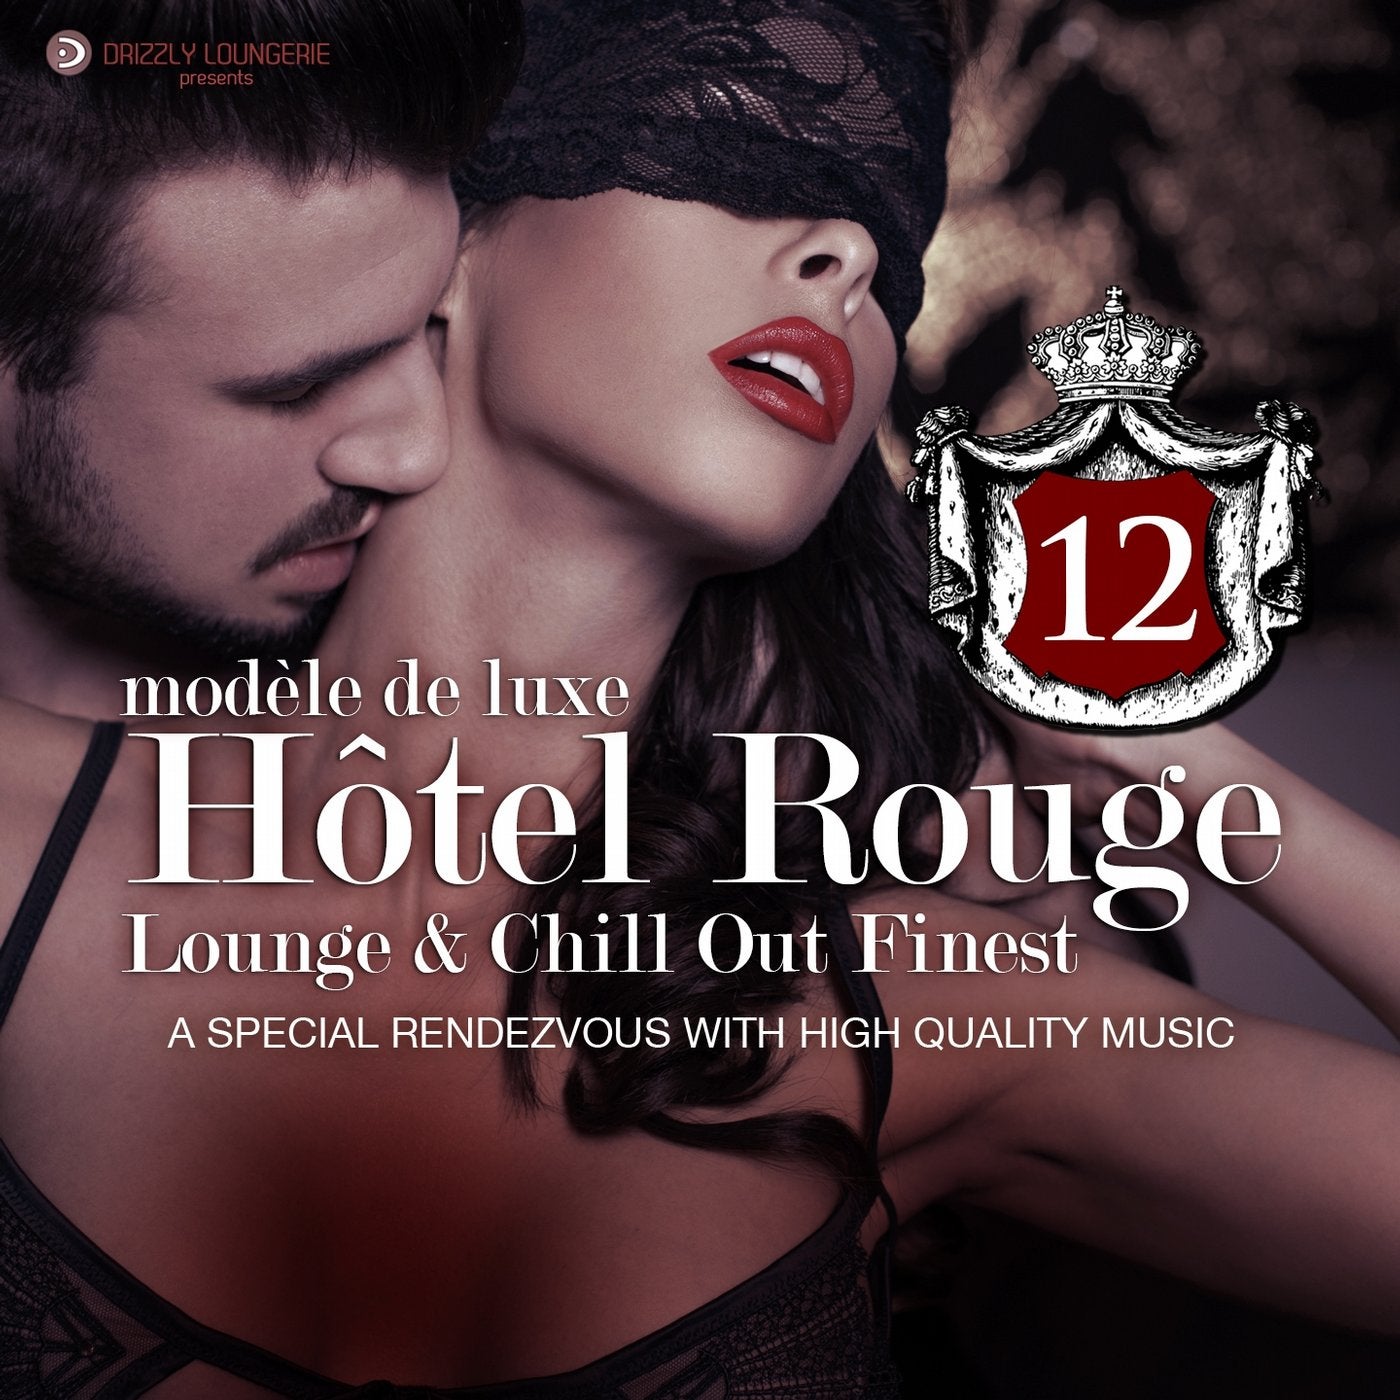 Hotel Rouge, Vol. 12 - Lounge and Chill out Finest (A Special Rendevouz with High Quality Music, Modele De Luxe)